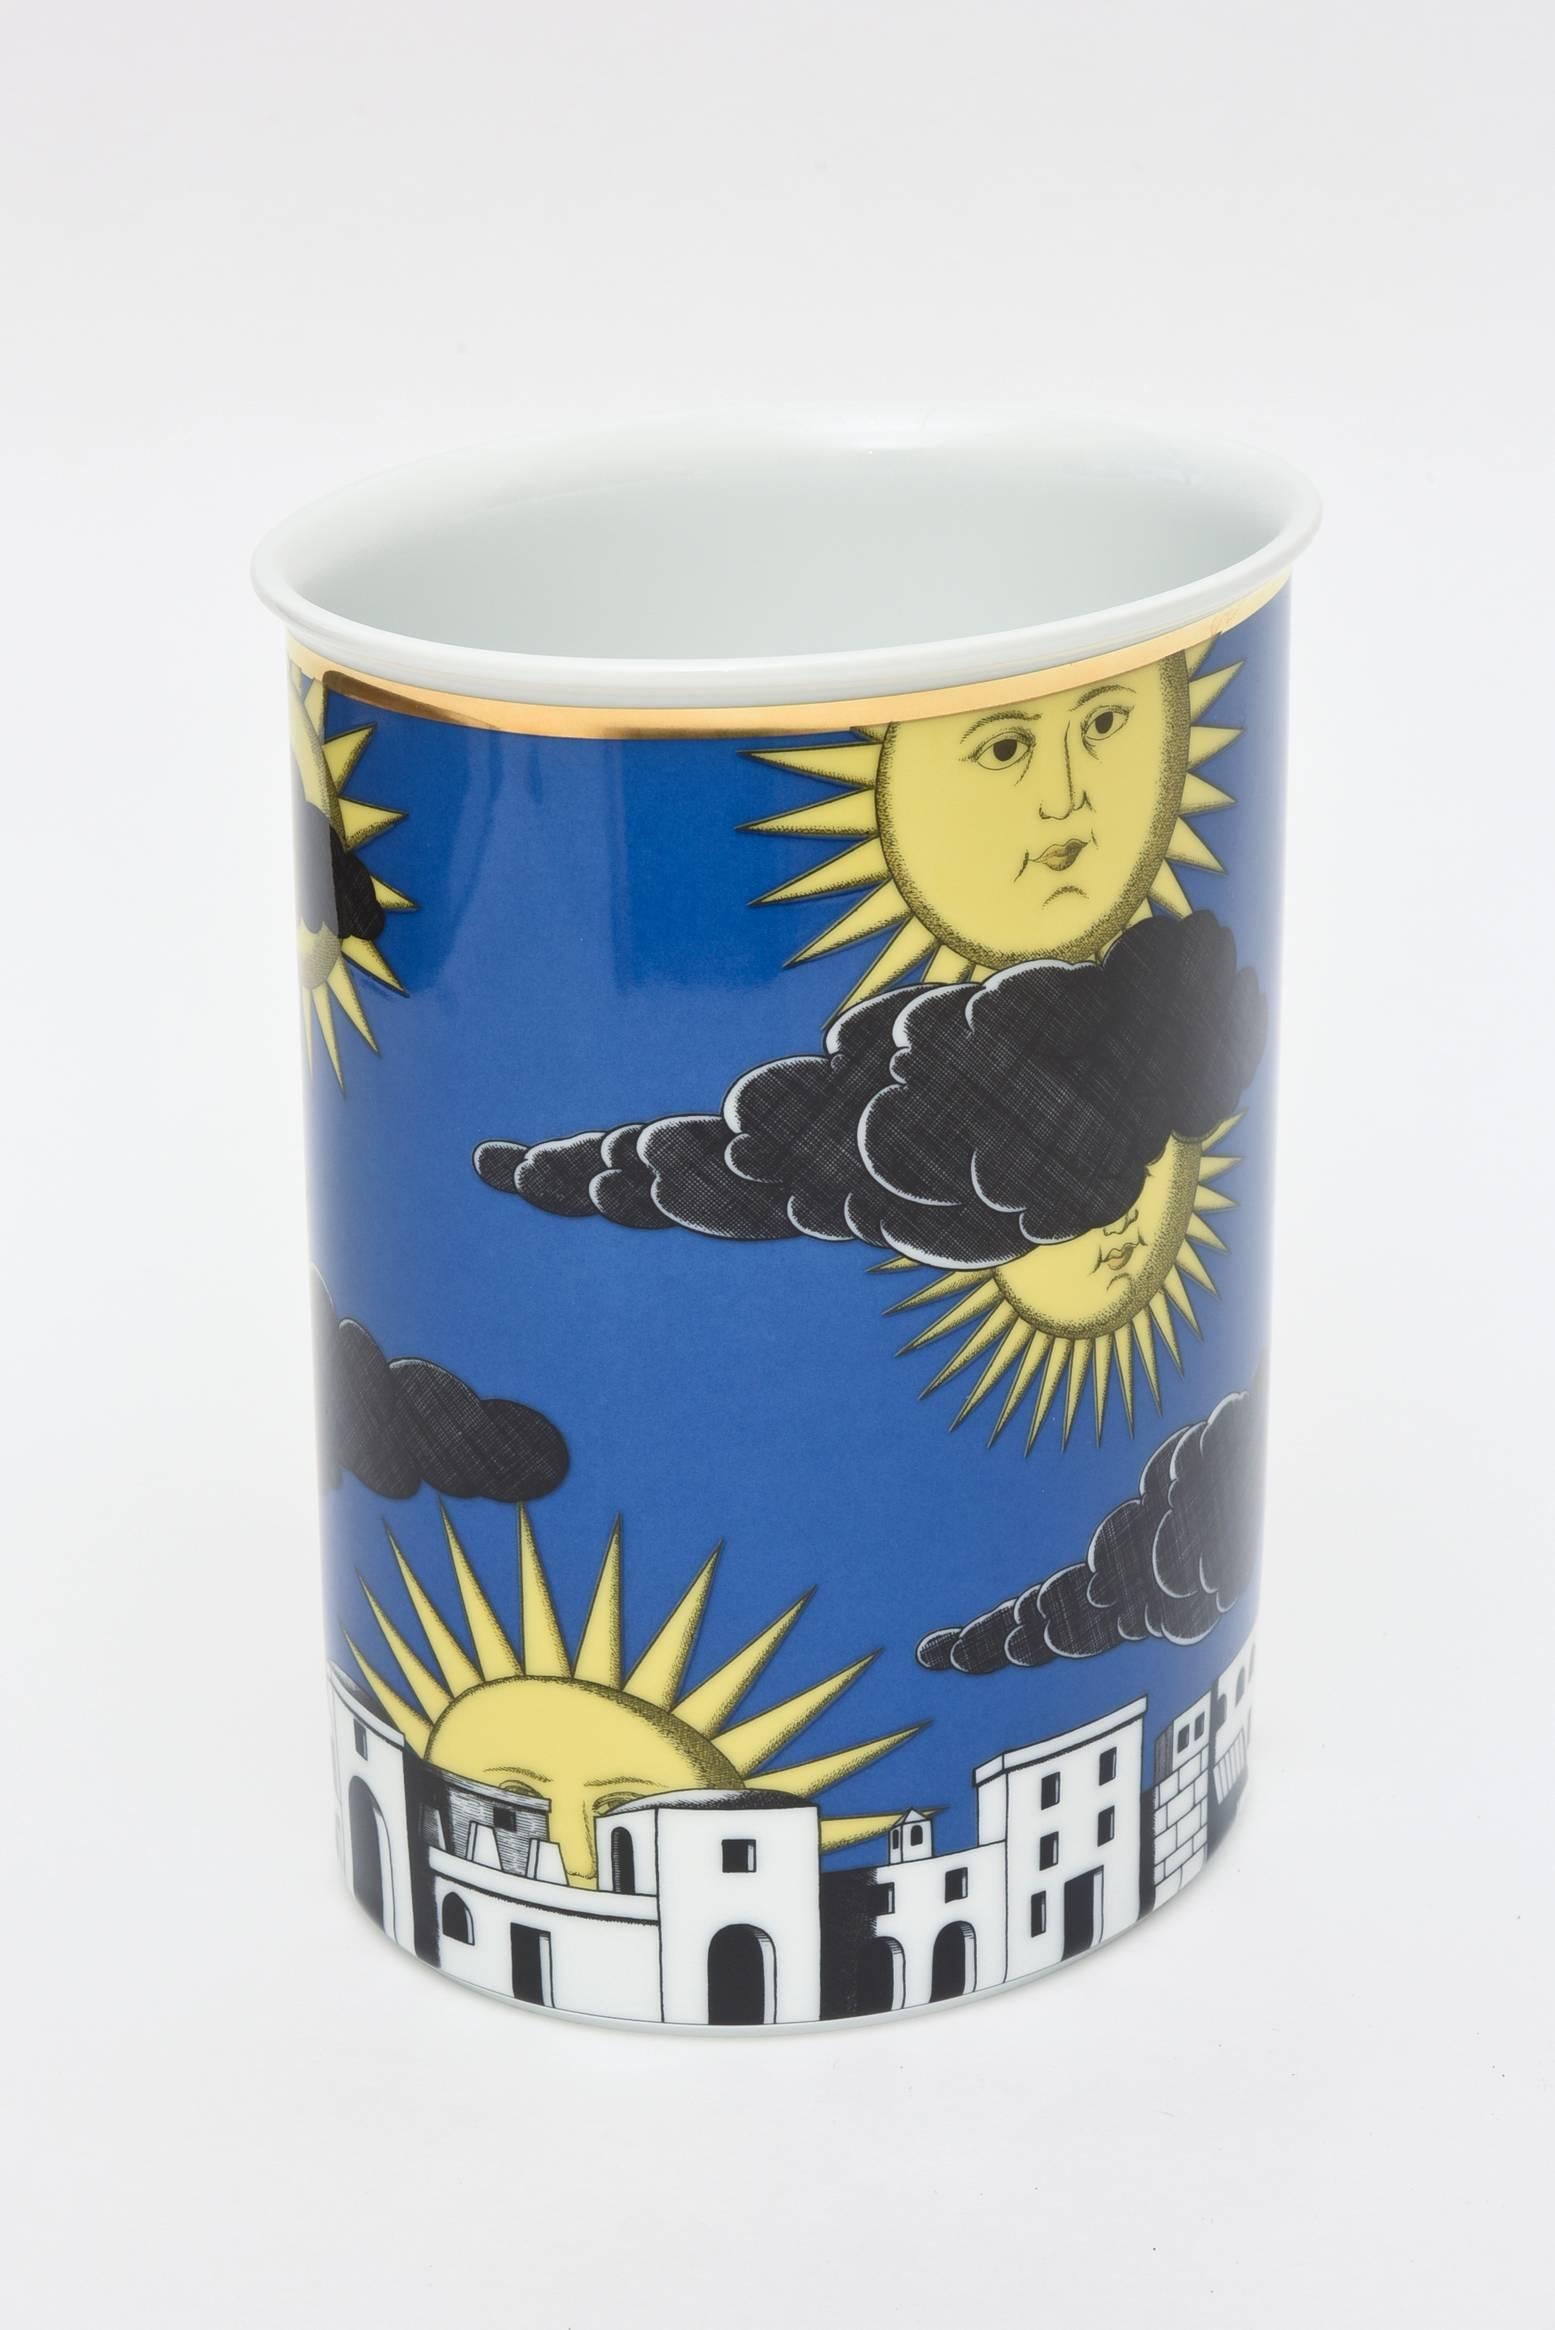 This large porcelain Fornasetti vase/vessel for Rosenthal Germany has a great depiction of the stylized architecture of Capri that meets the personified brilliant sun. The color combination of marigold yellow meets royal blue is most unusual.
It is